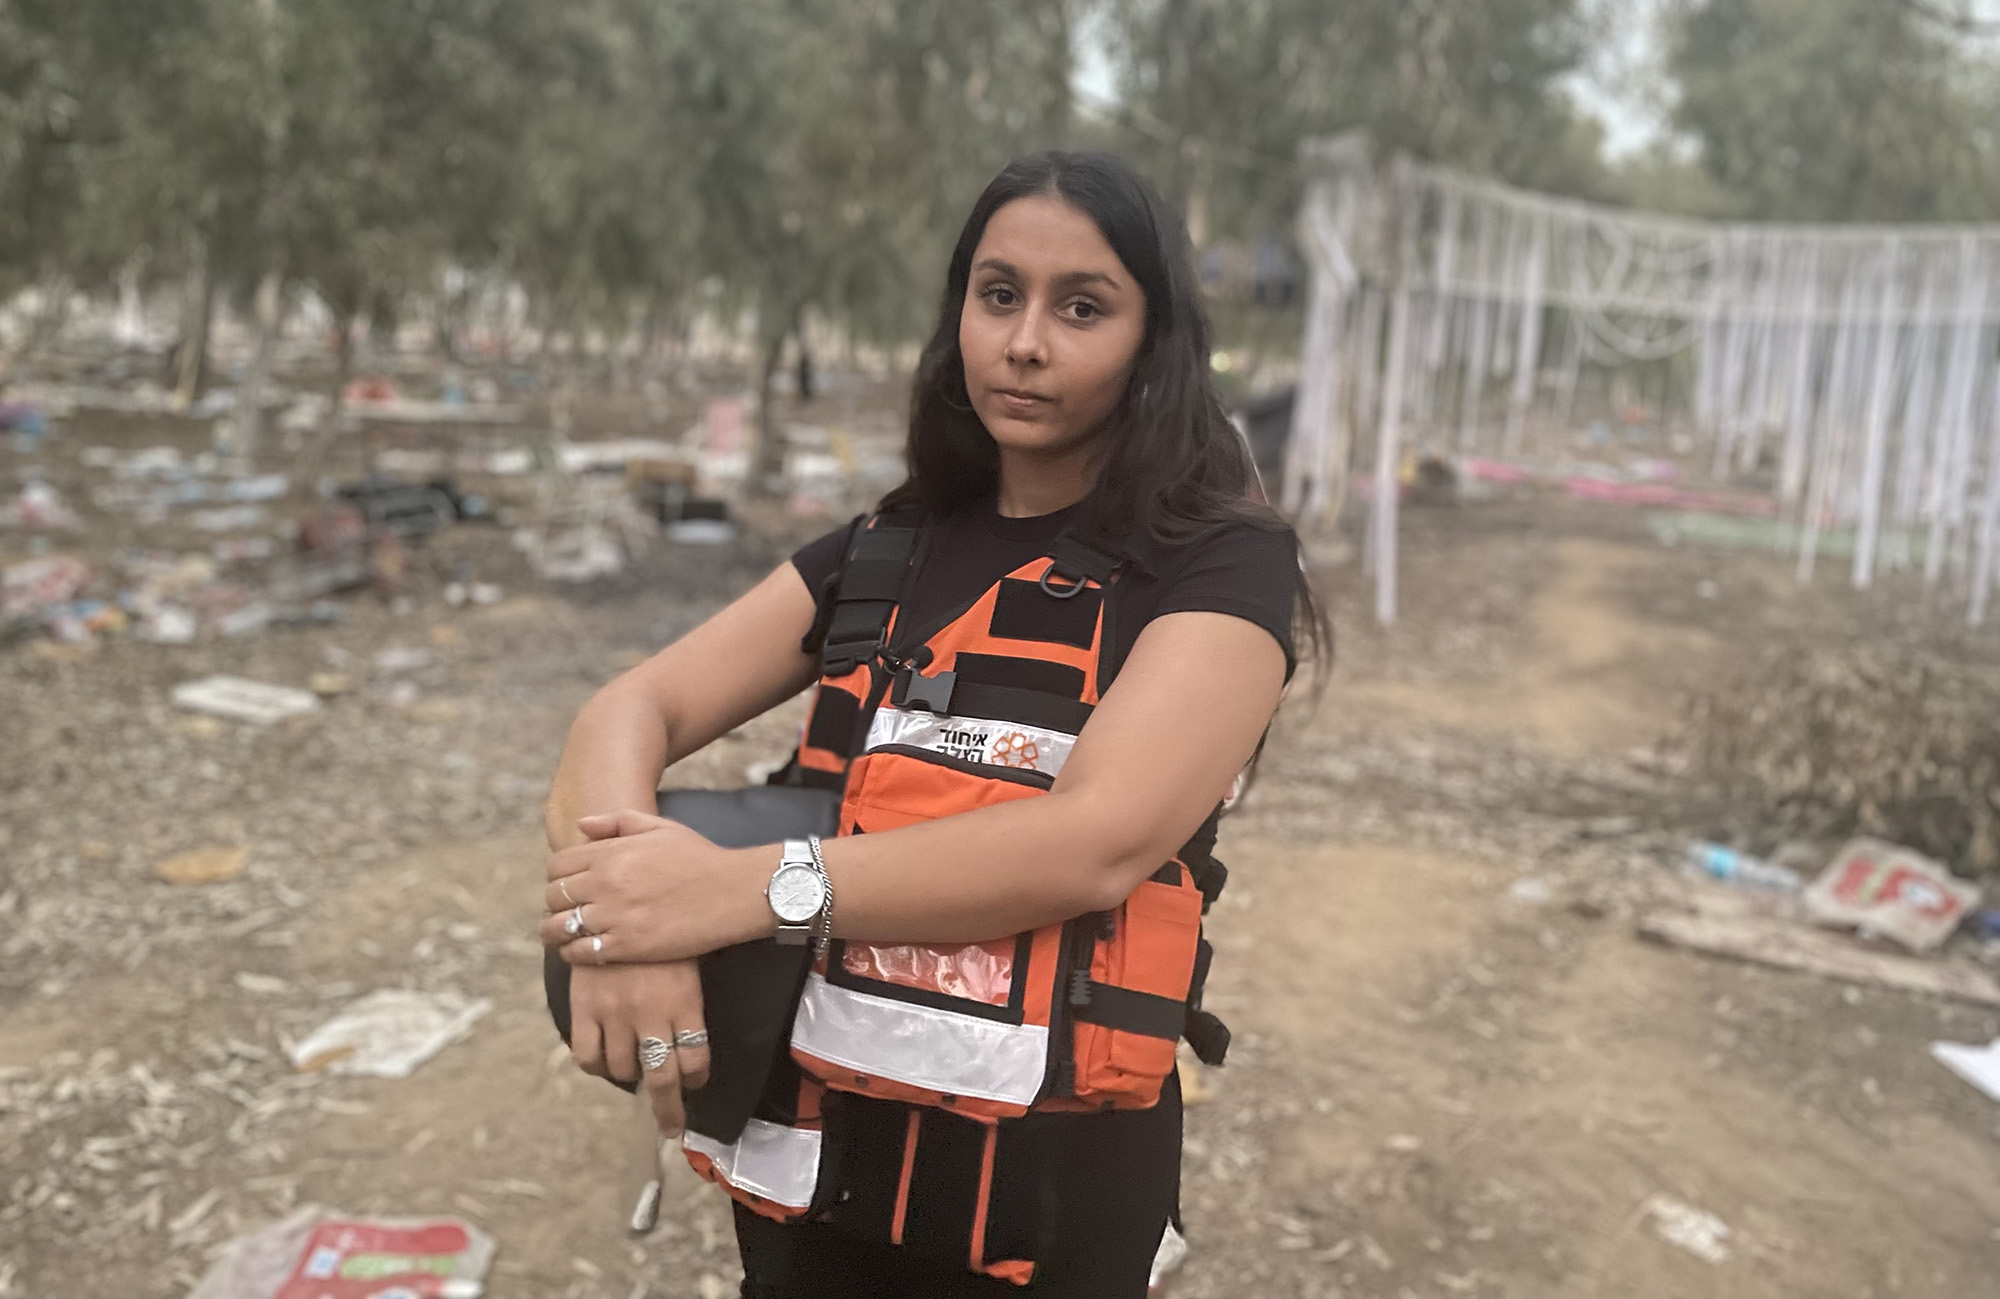 Aliza Samuel, 24, returned to the site of the deadly Nova festival attack by Hamas militants, in southern Israel, on October 7.